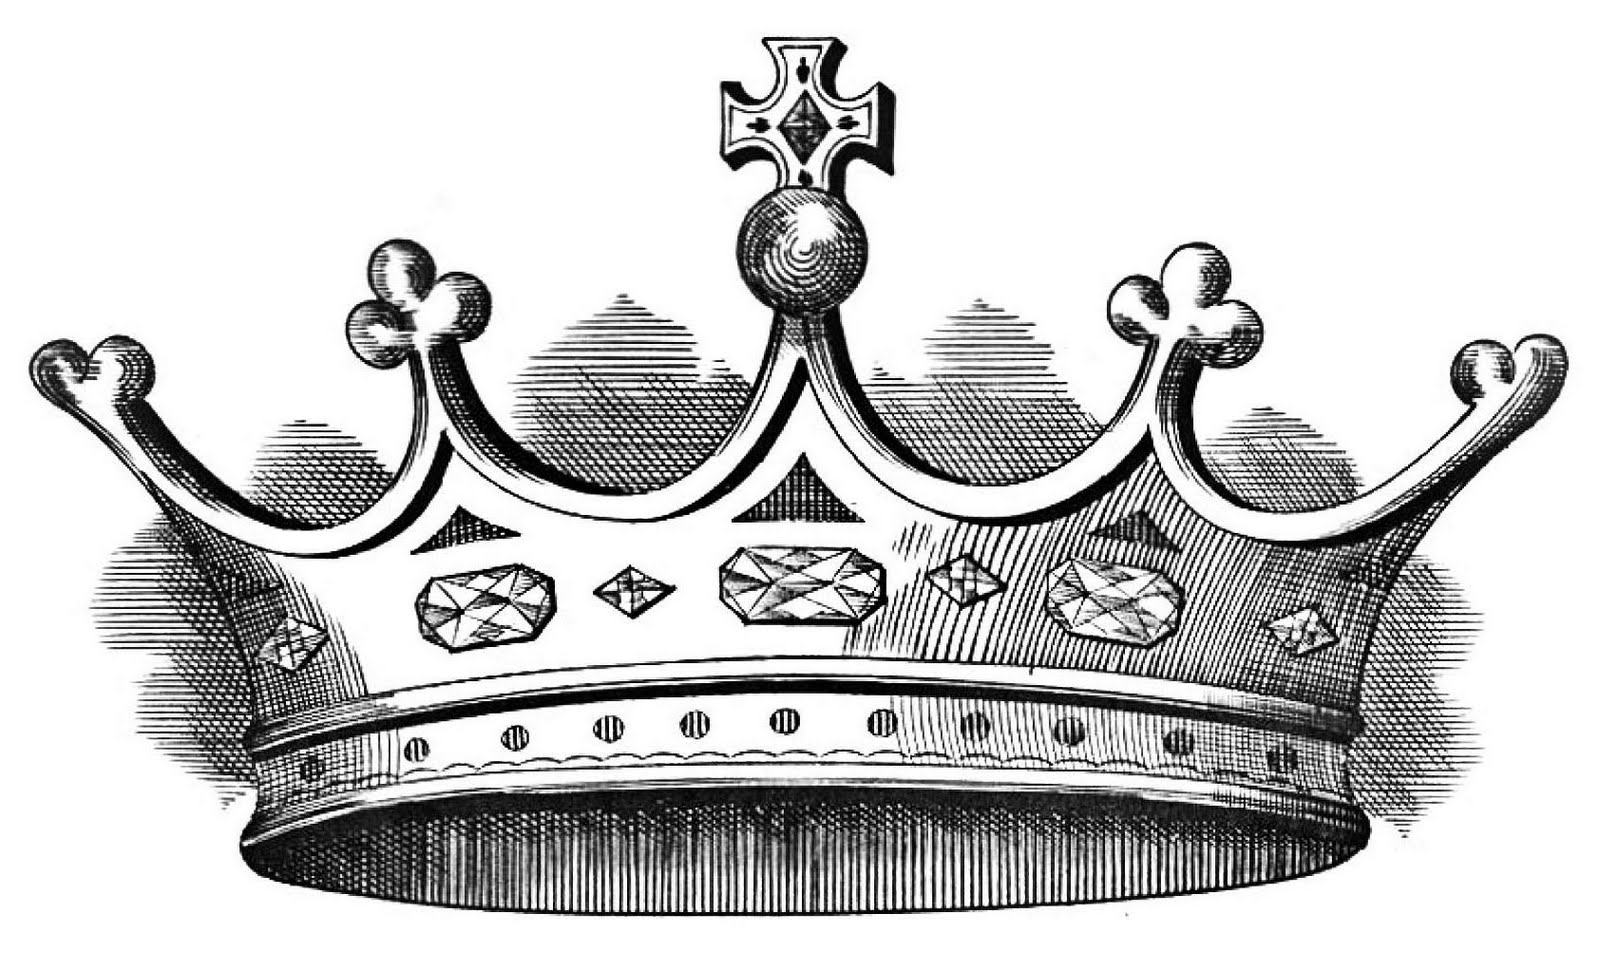 Free Medieval Crown Cliparts, Download Free Clip Art, Free